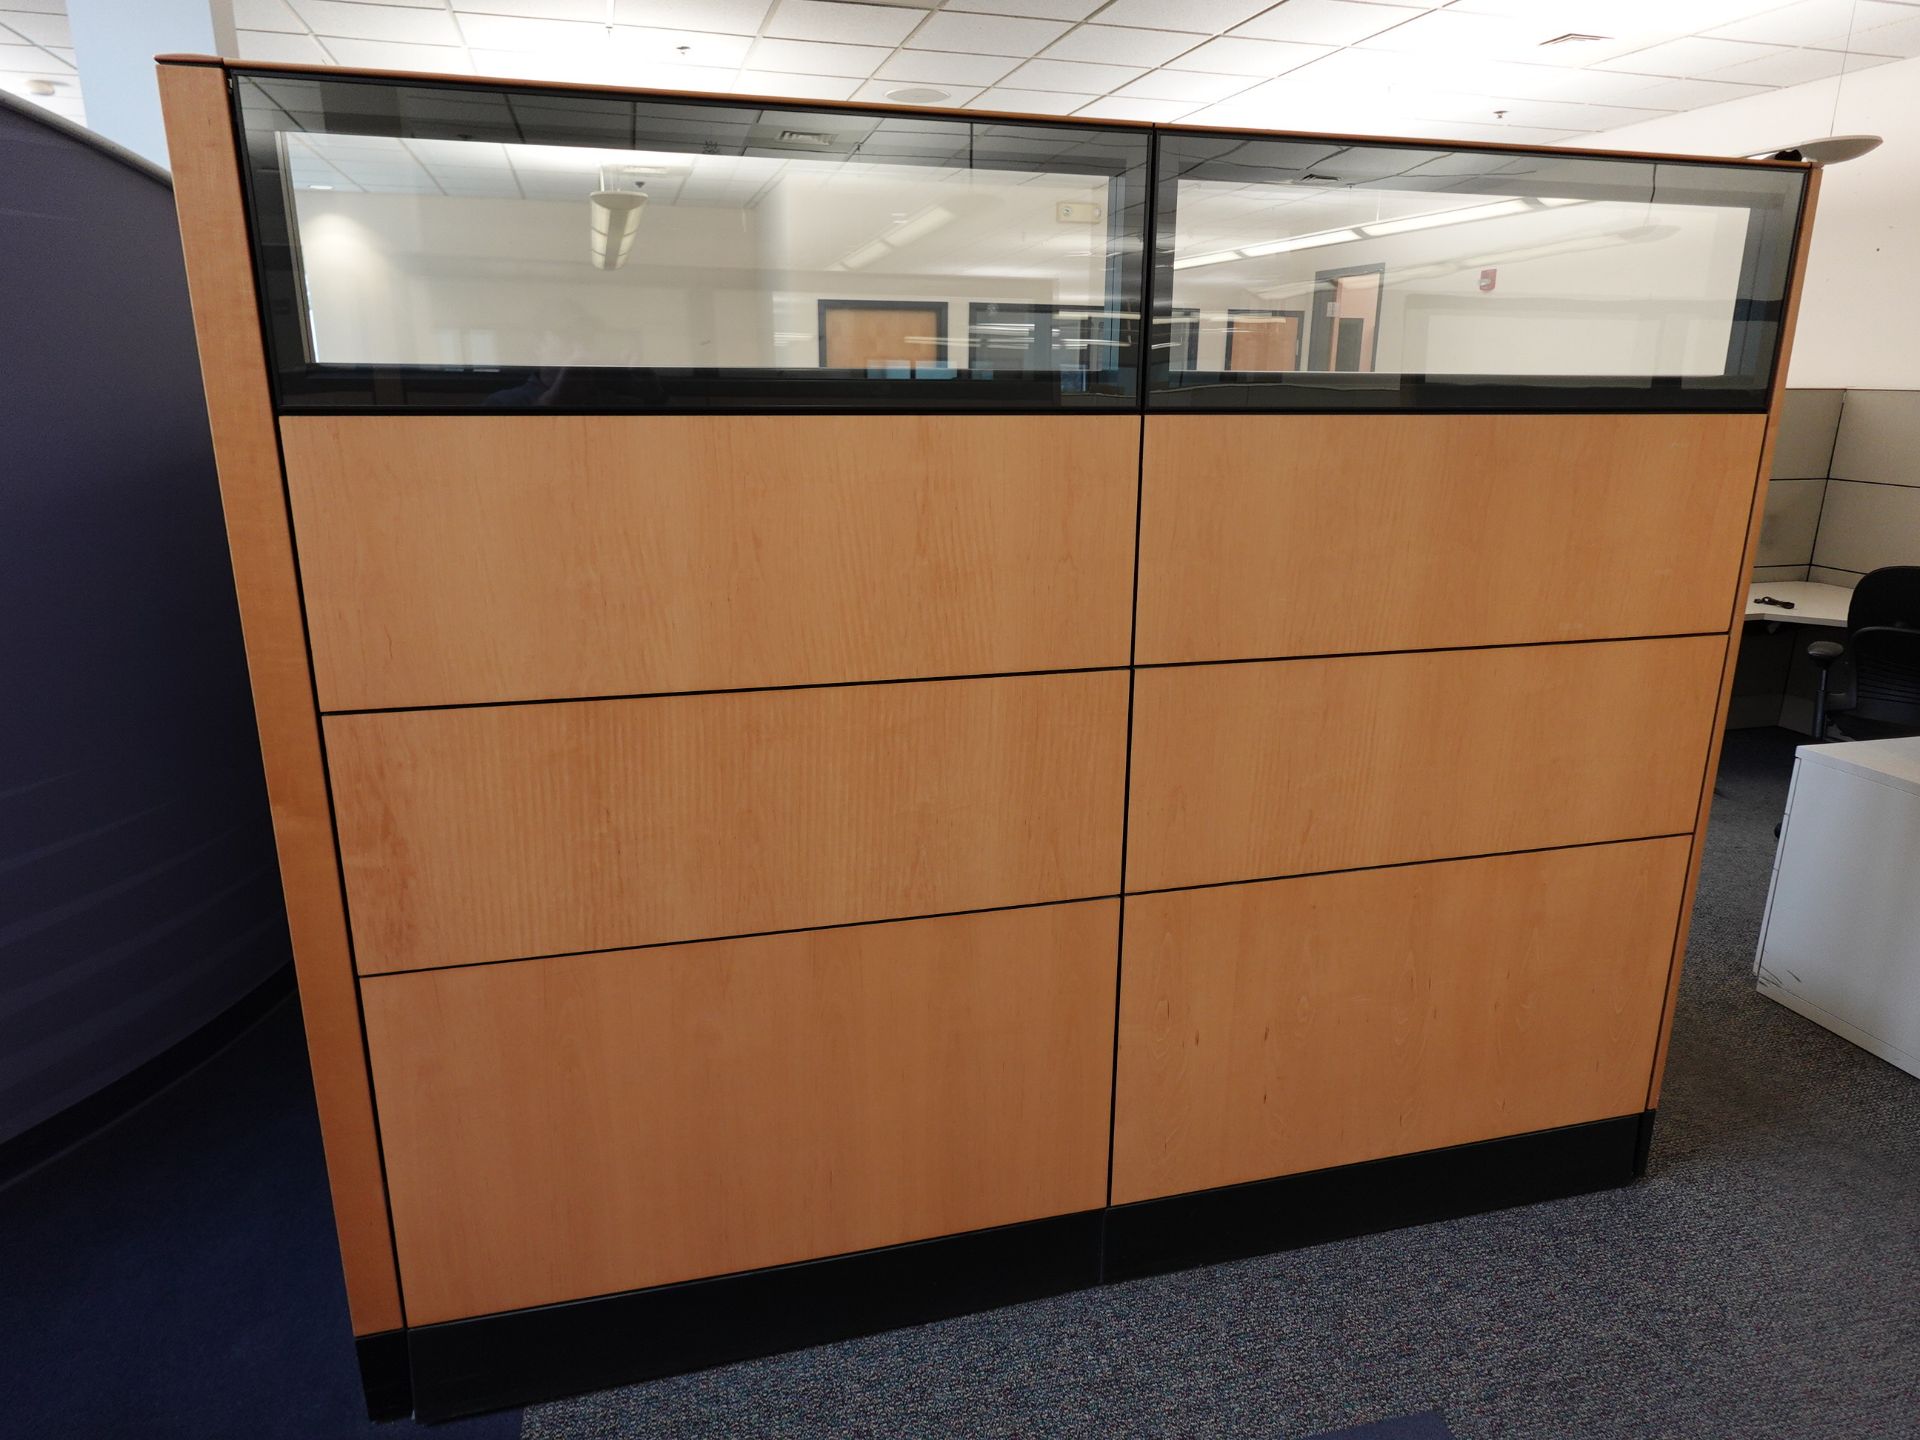 Haworth Office Cubicals - Image 11 of 11